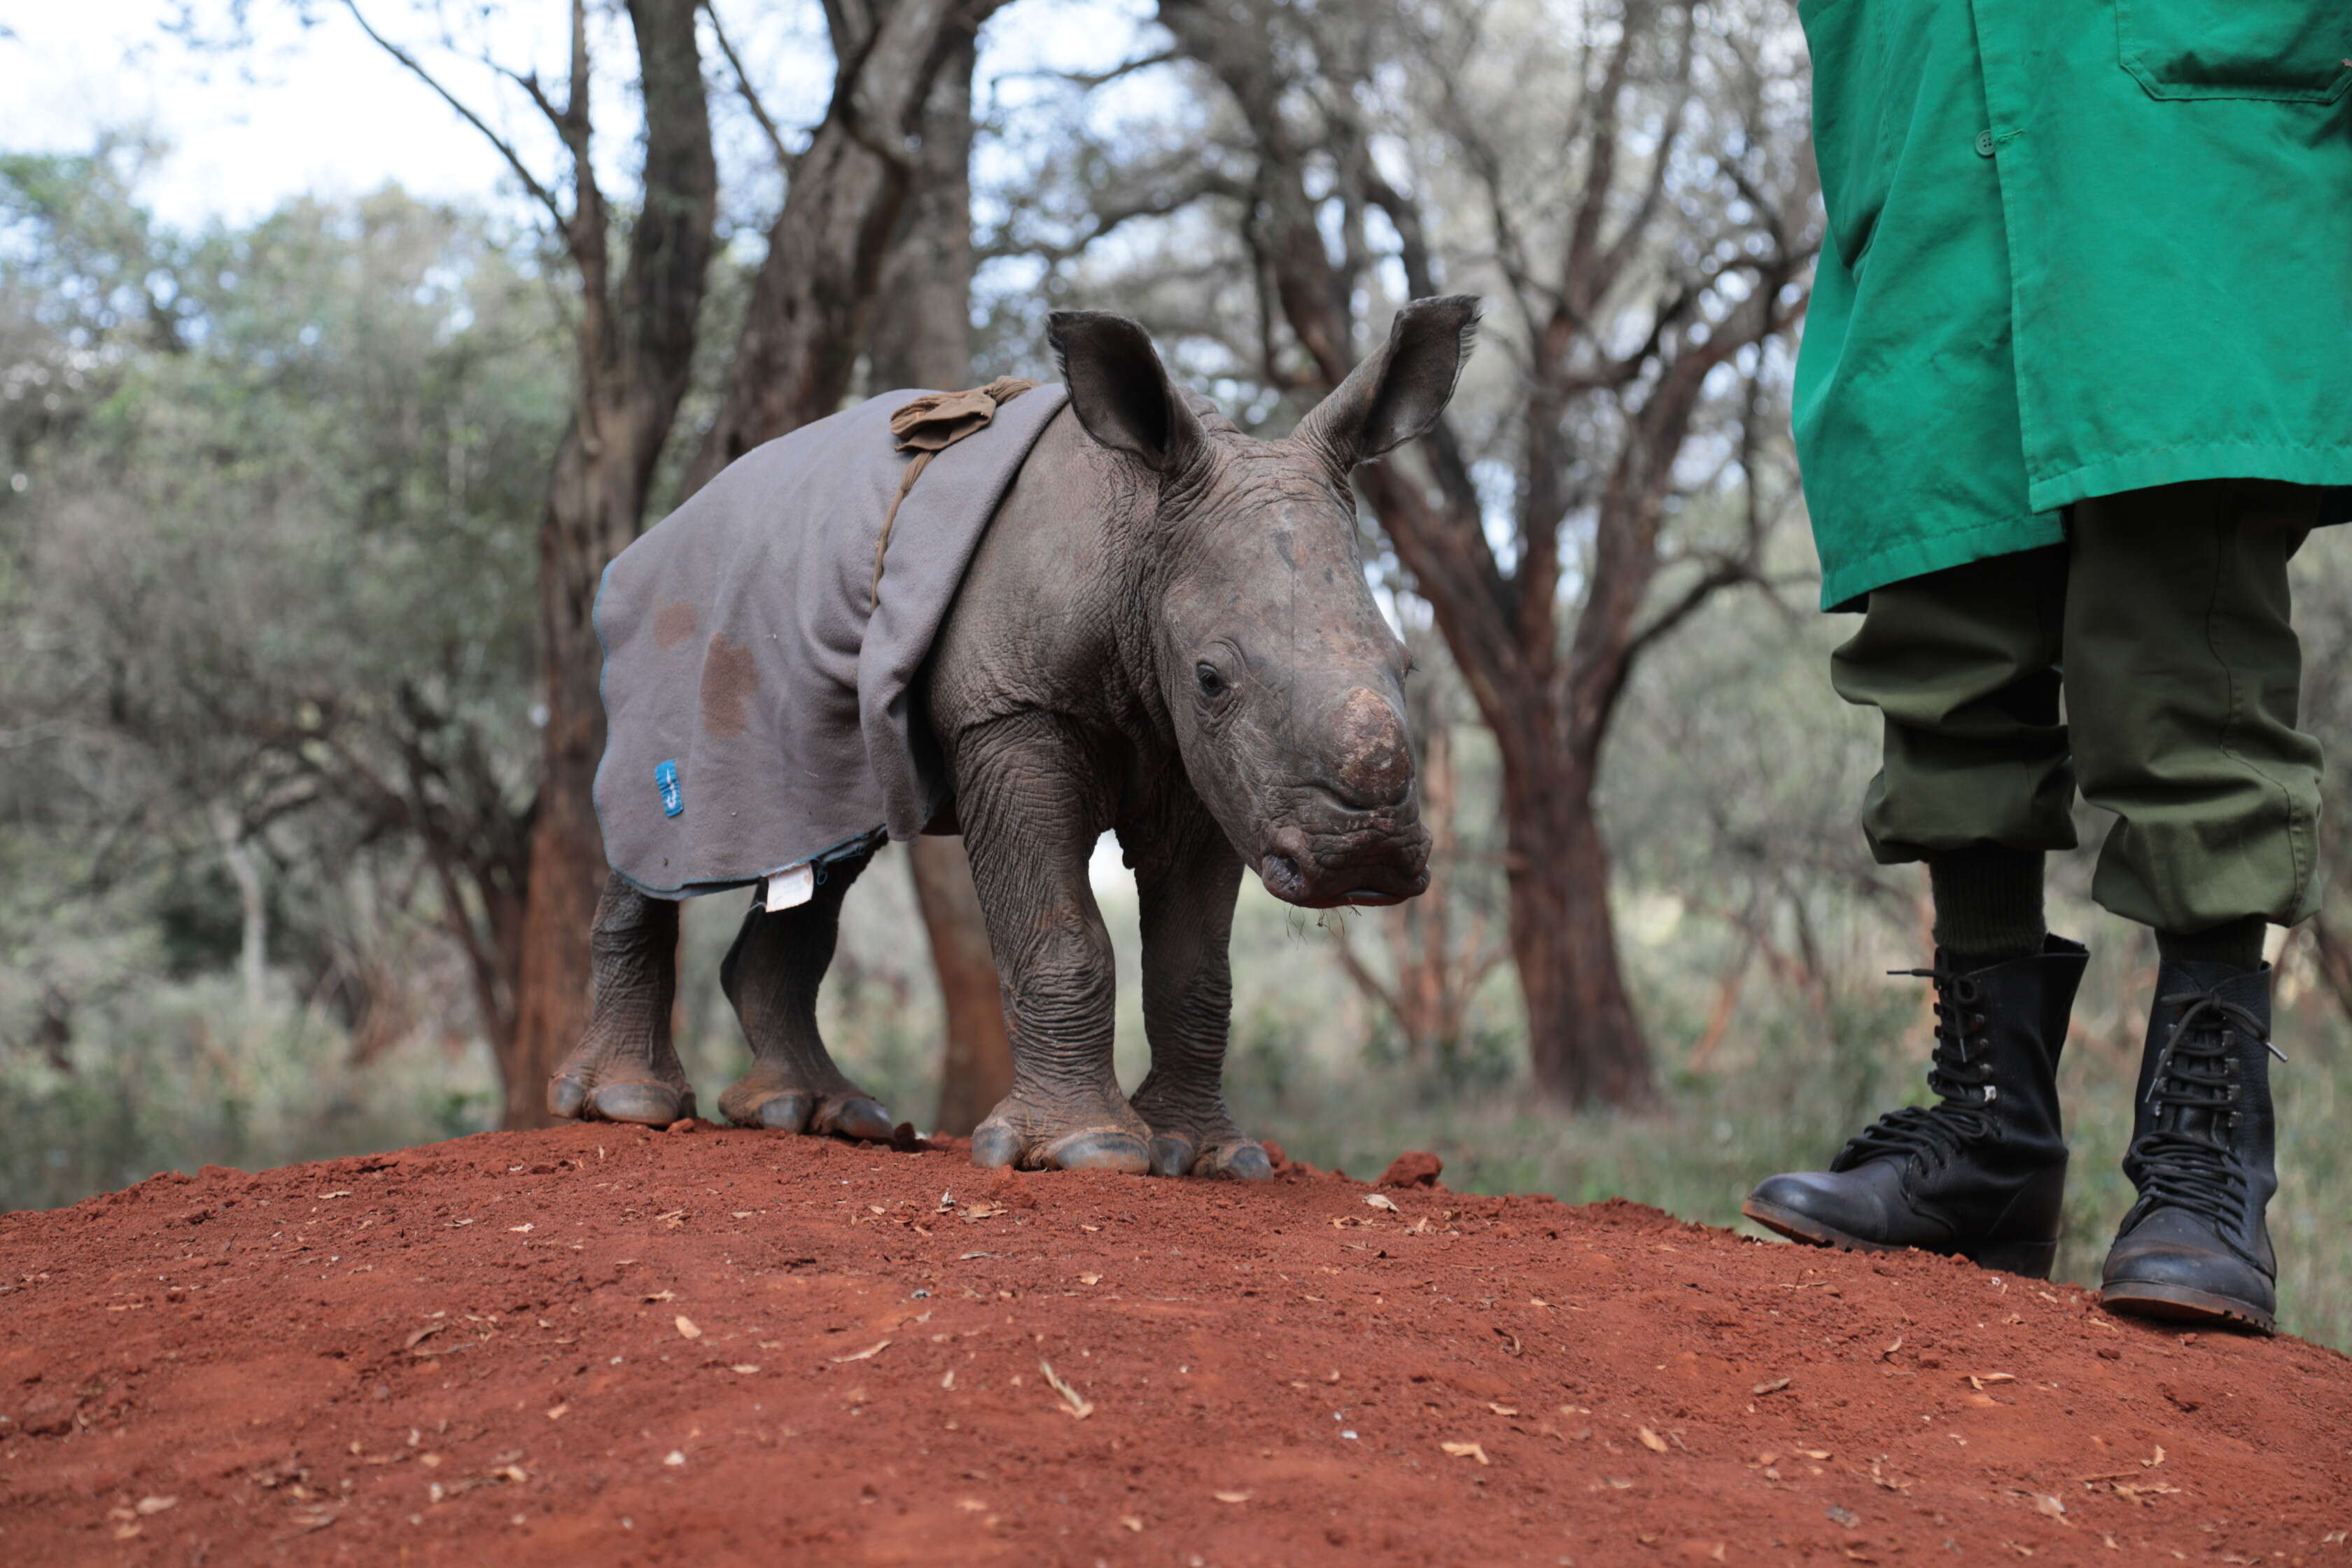 Baby rhino with blanket on her back